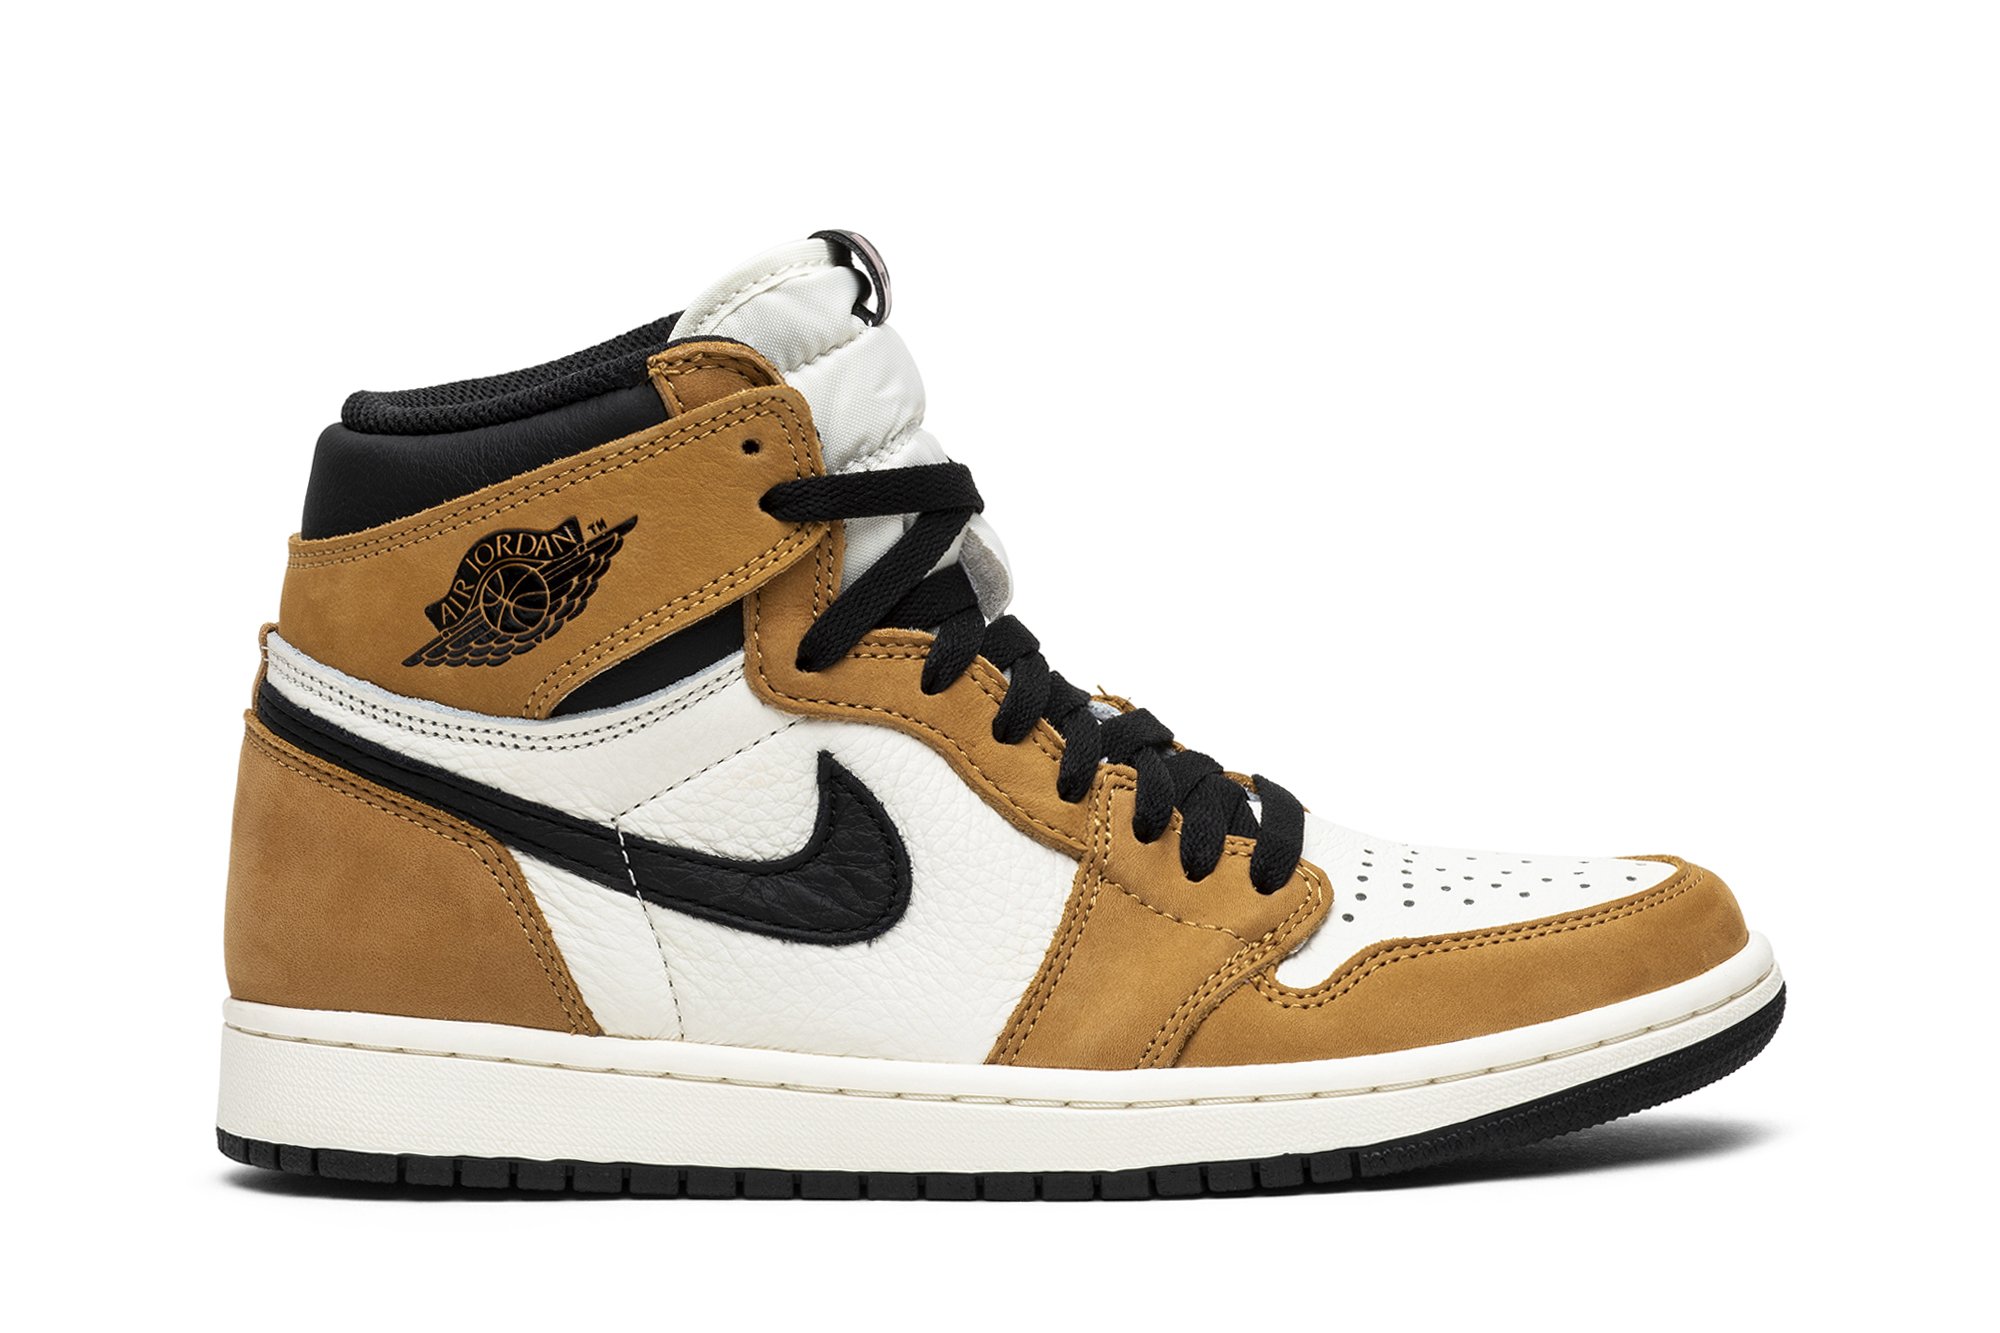 Rookie of the year AJ1Retro high OG